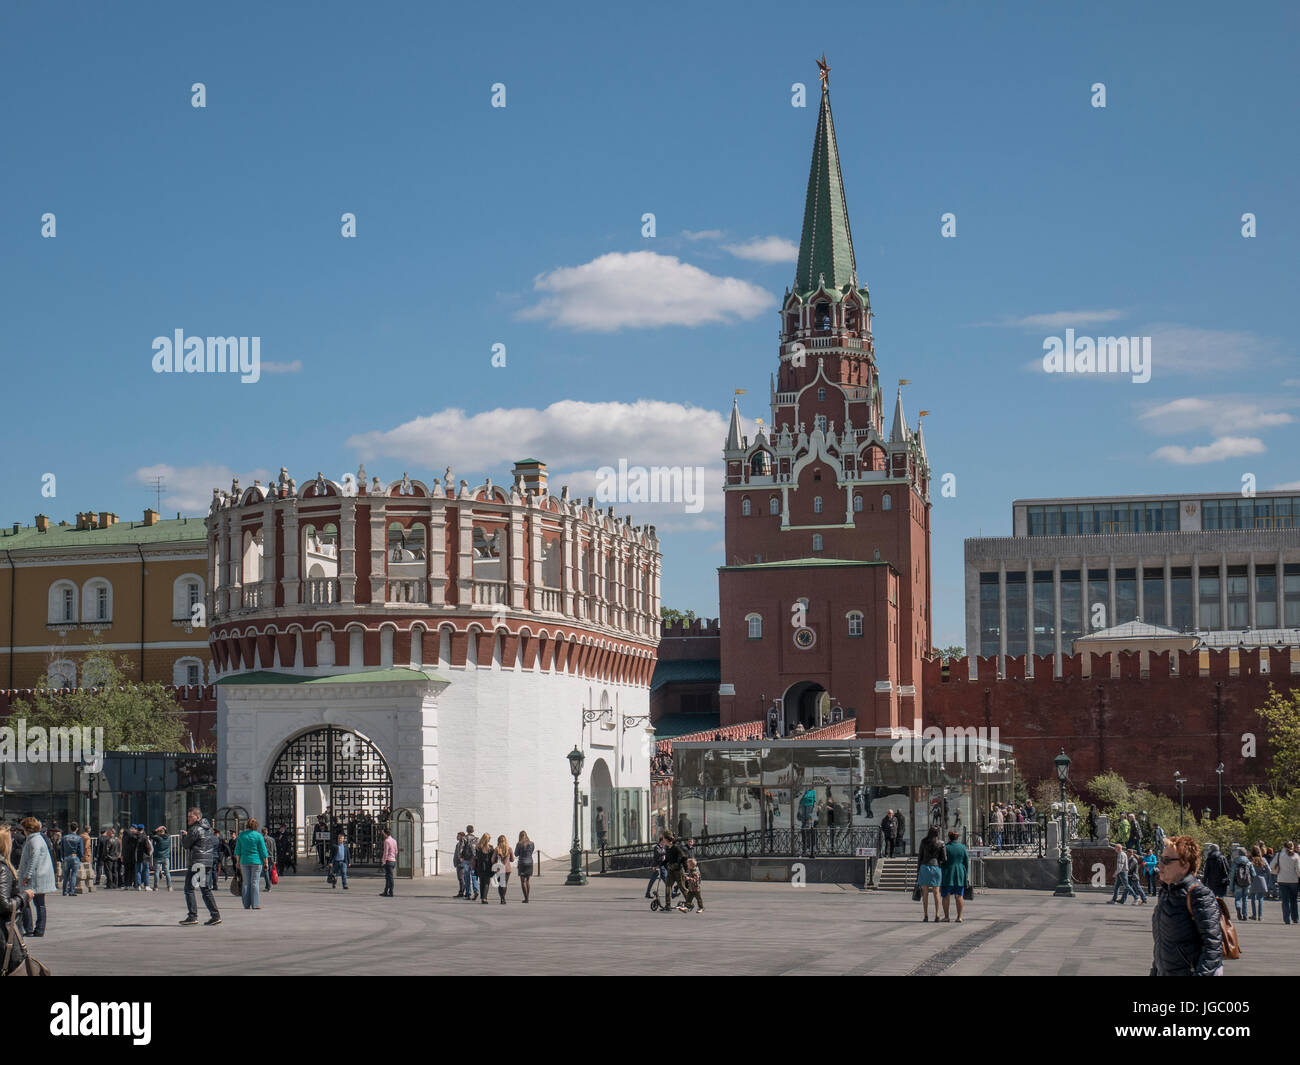 Trinity Tower built in 1495. Kutafya tower built in 1516 to defend the bridges to the Kremlin in Moscow Stock Photo